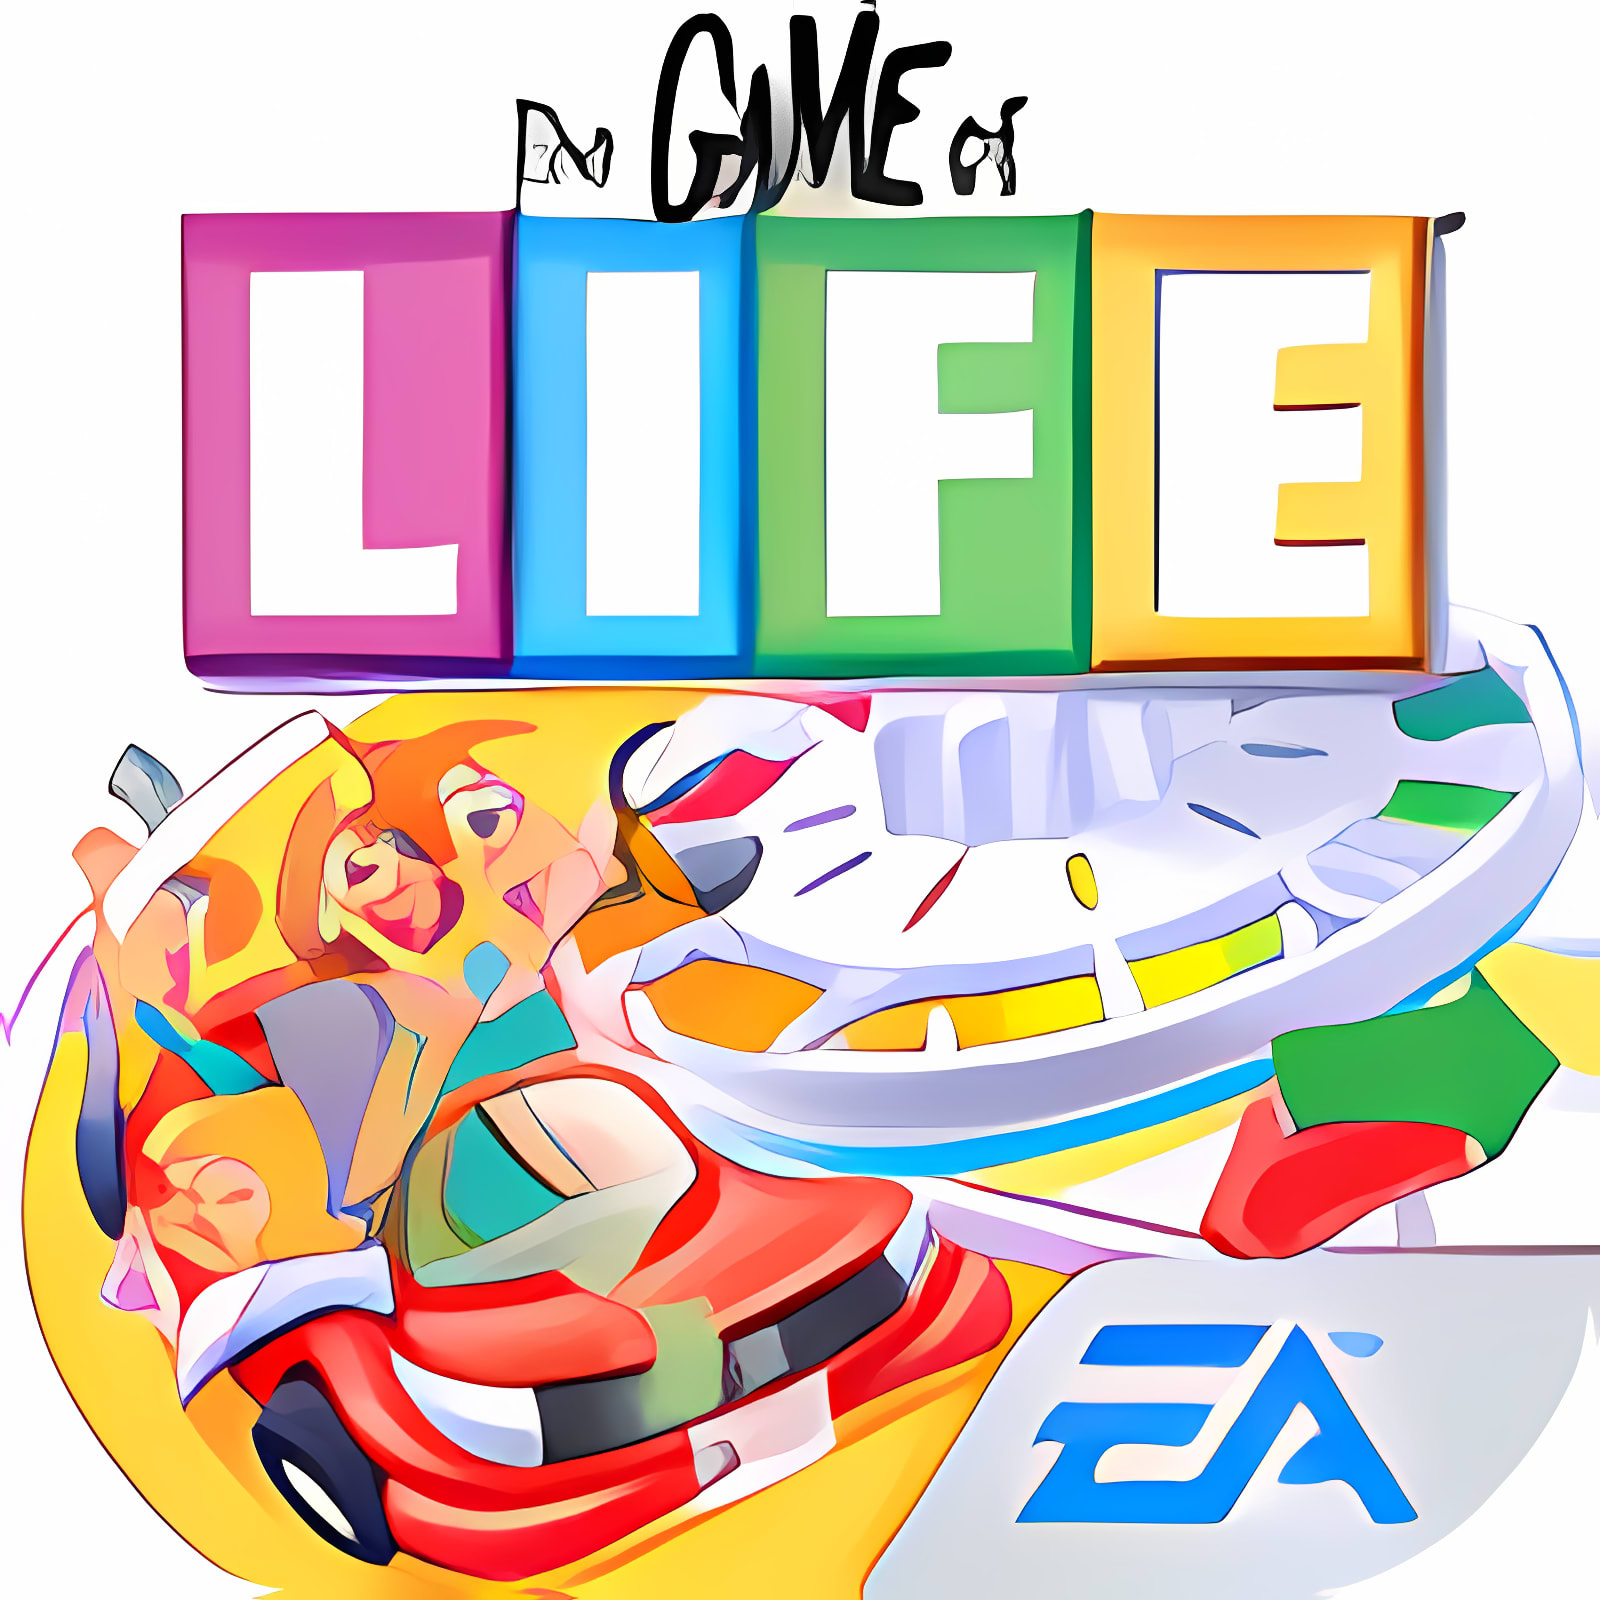 Download The Game of Life Classic Edition Install Latest App downloader